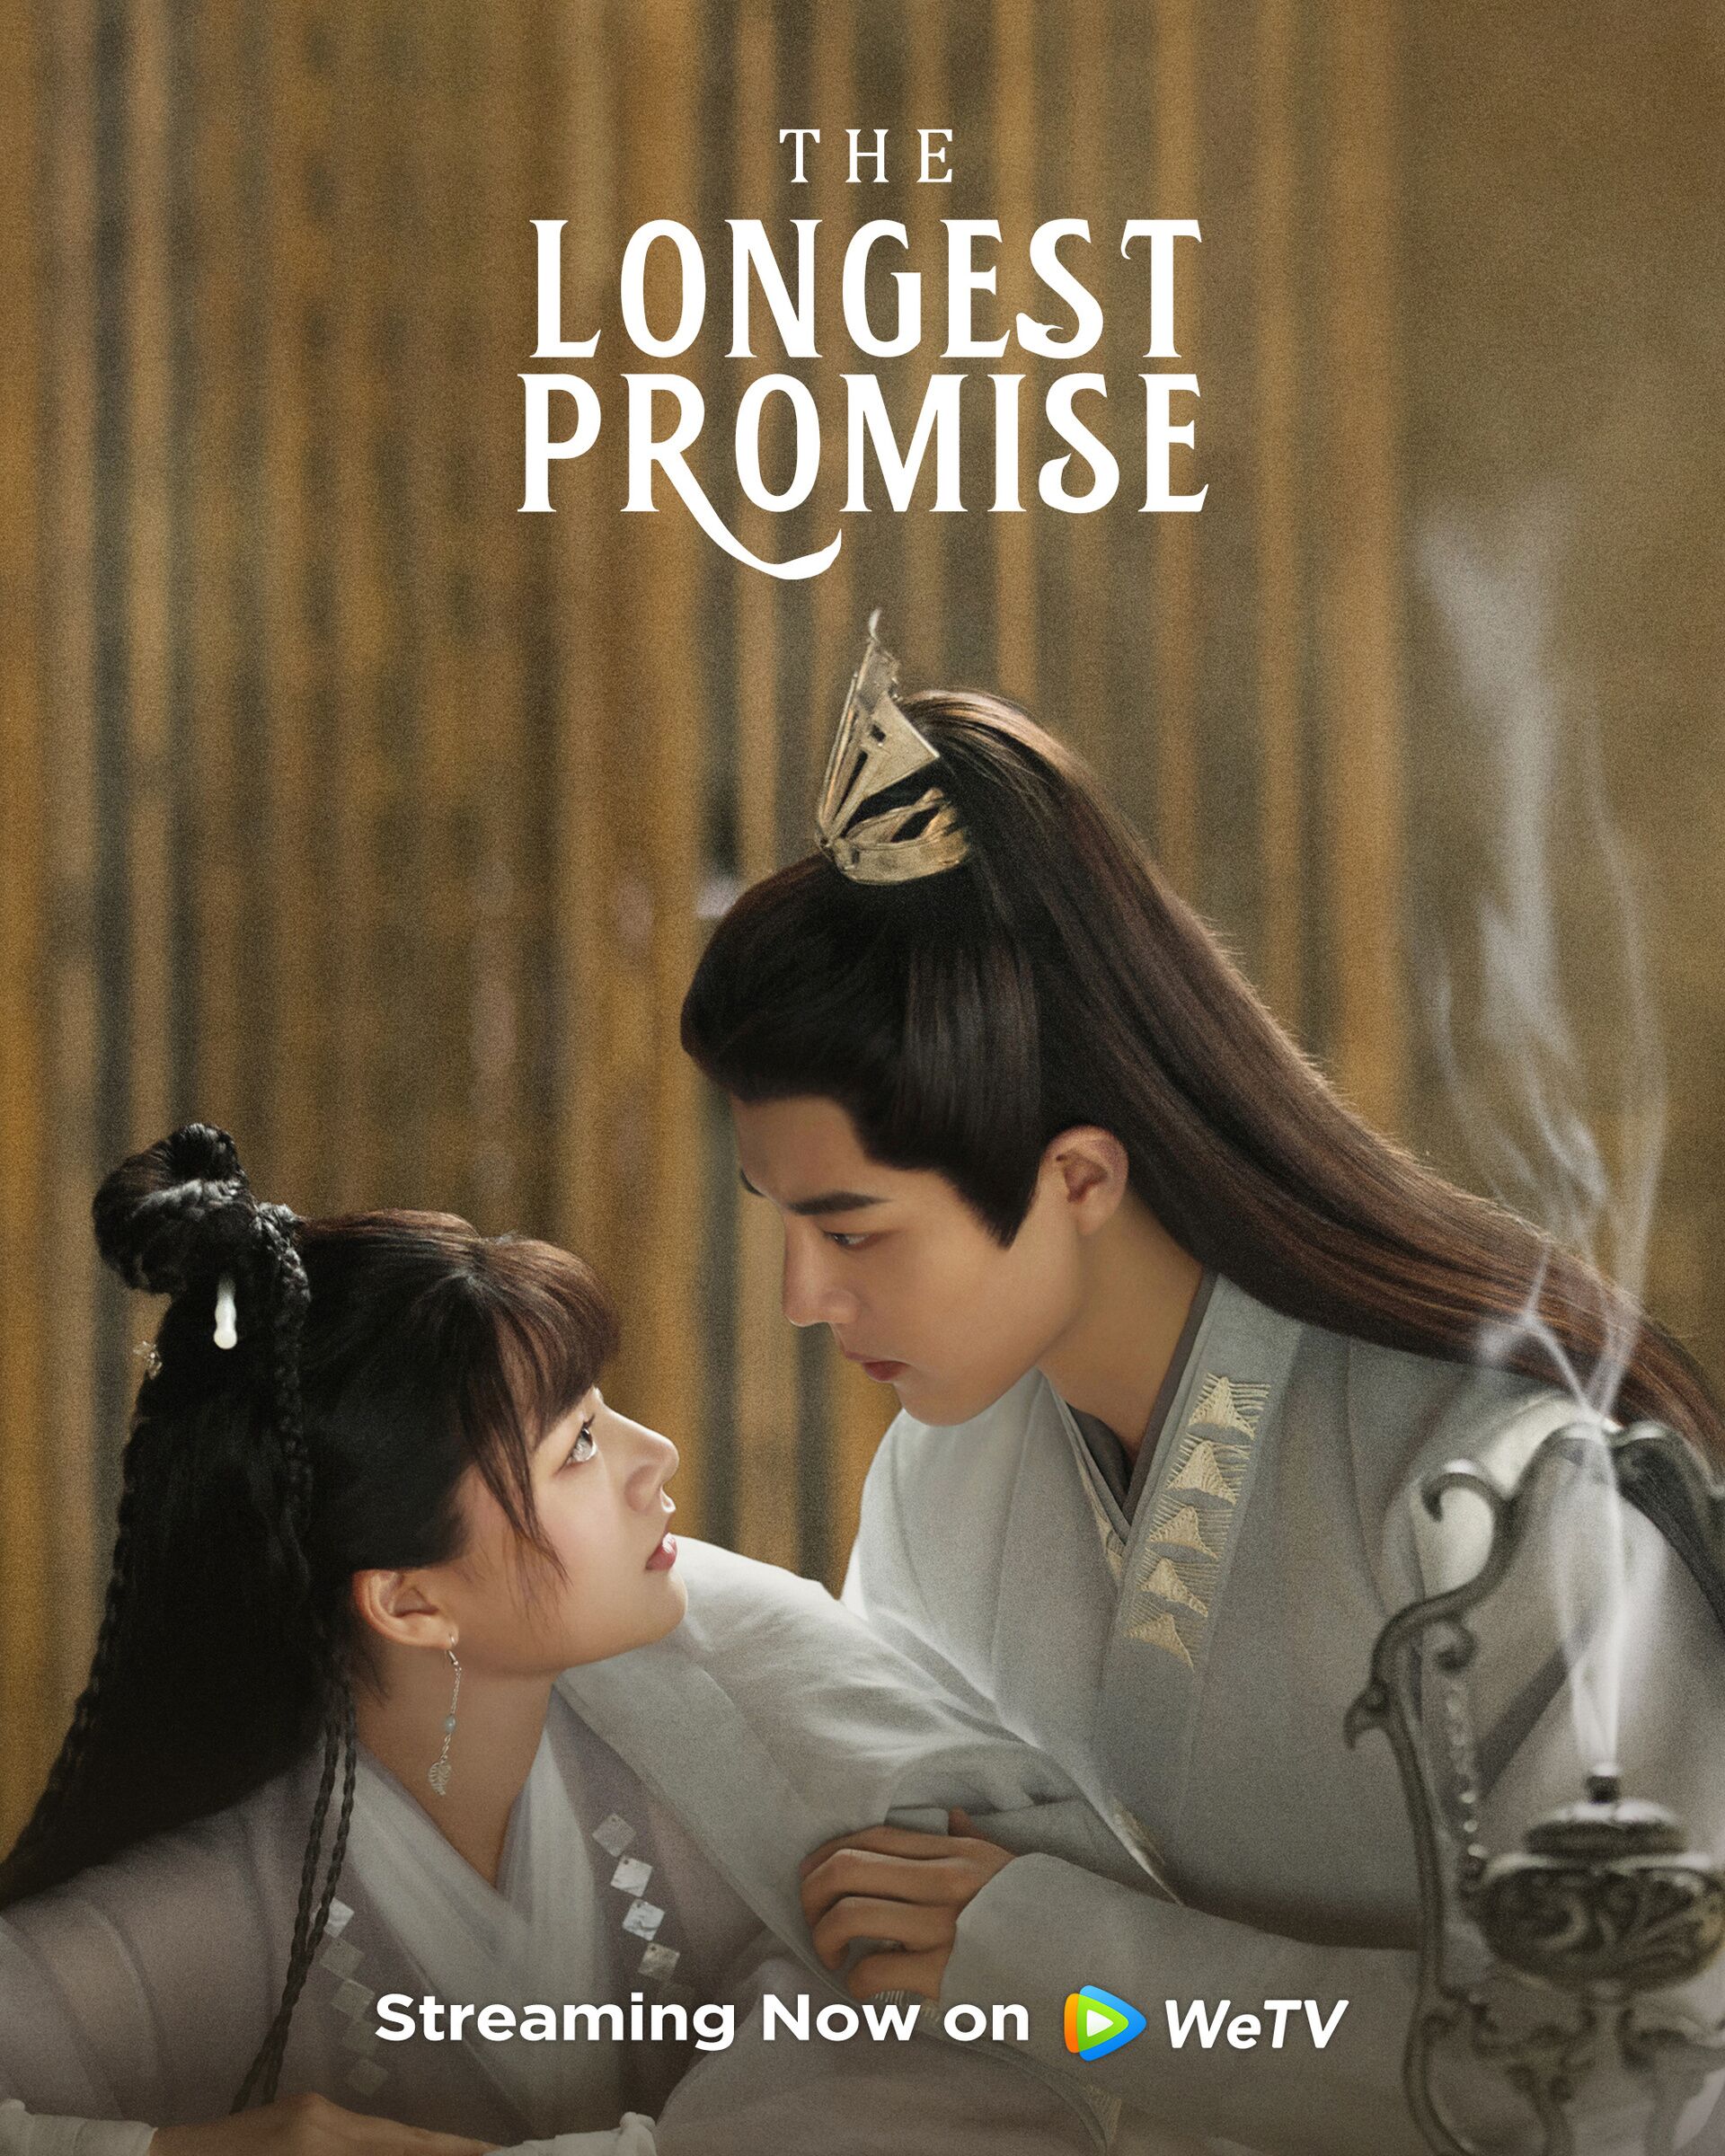 The Longest Promise with Xiao Zhan